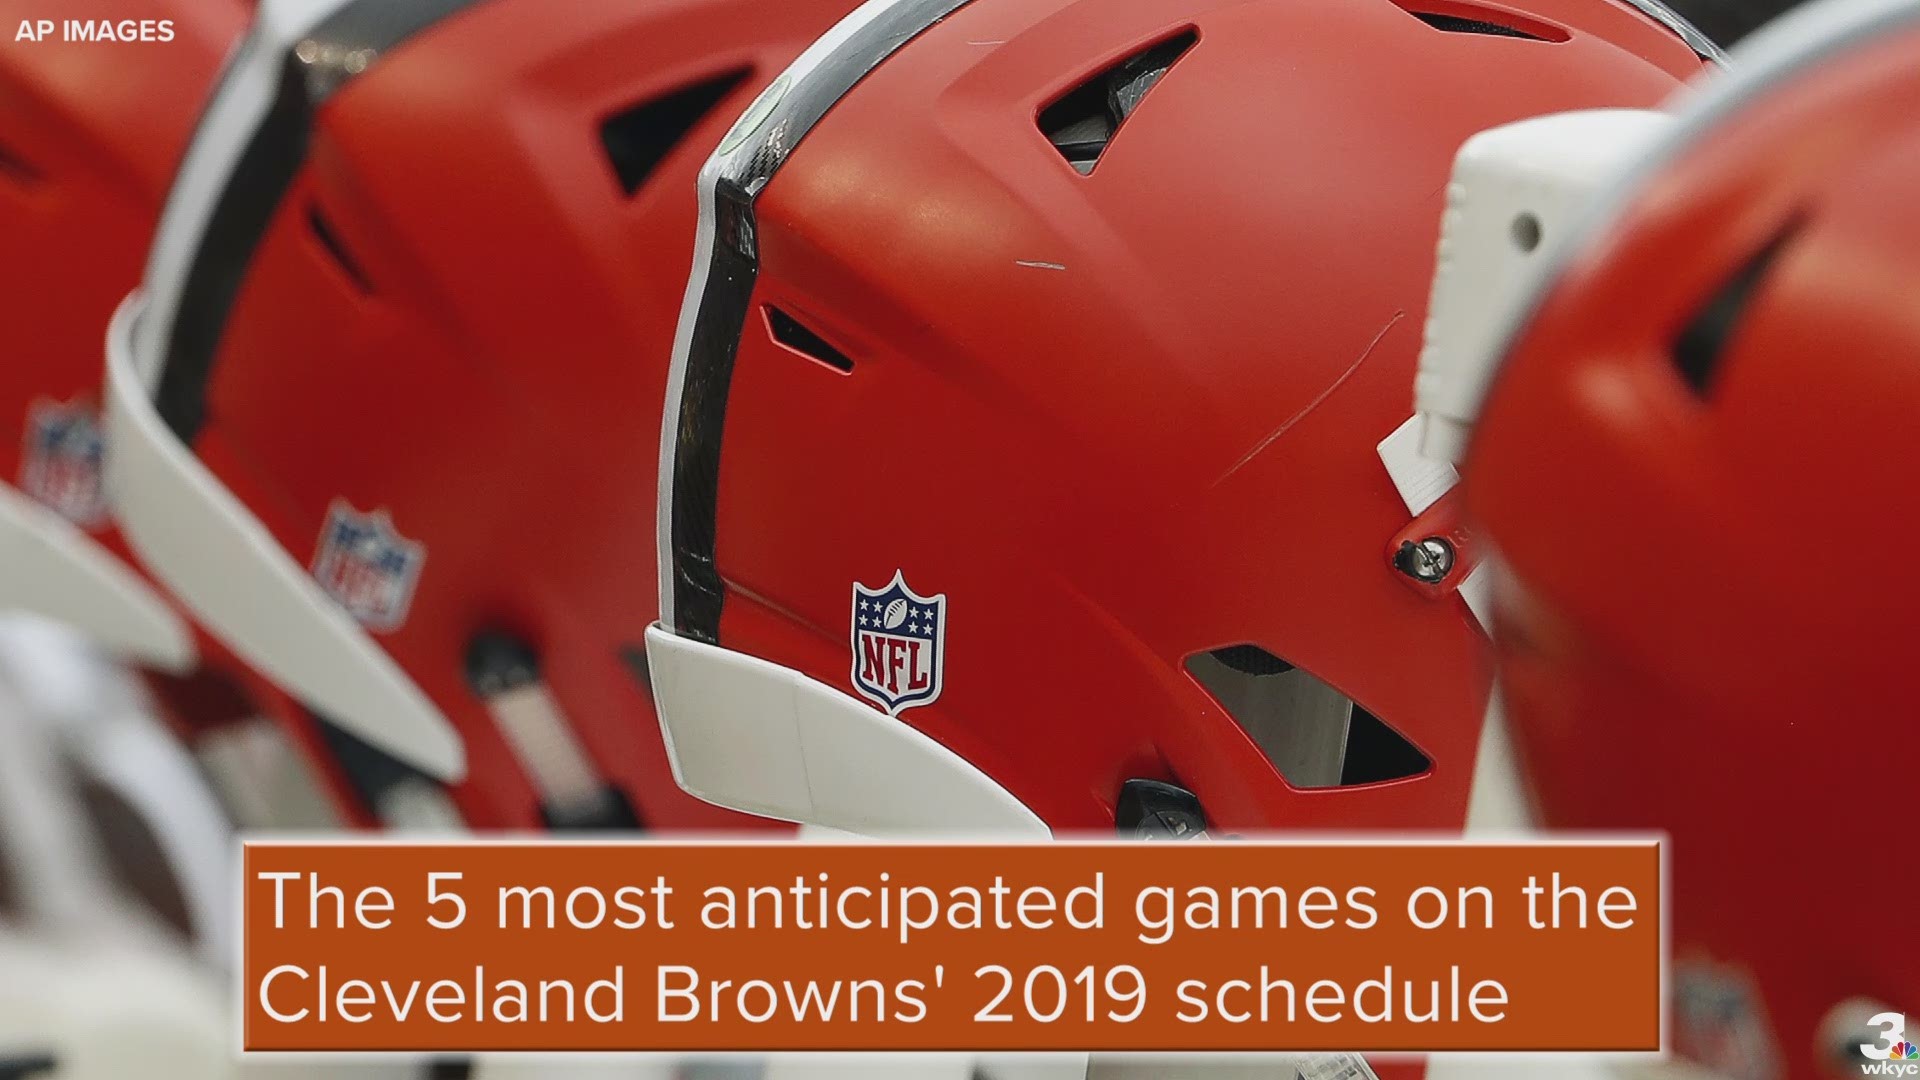 Following the emergence of Baker Mayfield and acquisition of Odell Beckham Jr., the Cleveland Browns' 2019 schedule isn't short on high profile matchups.